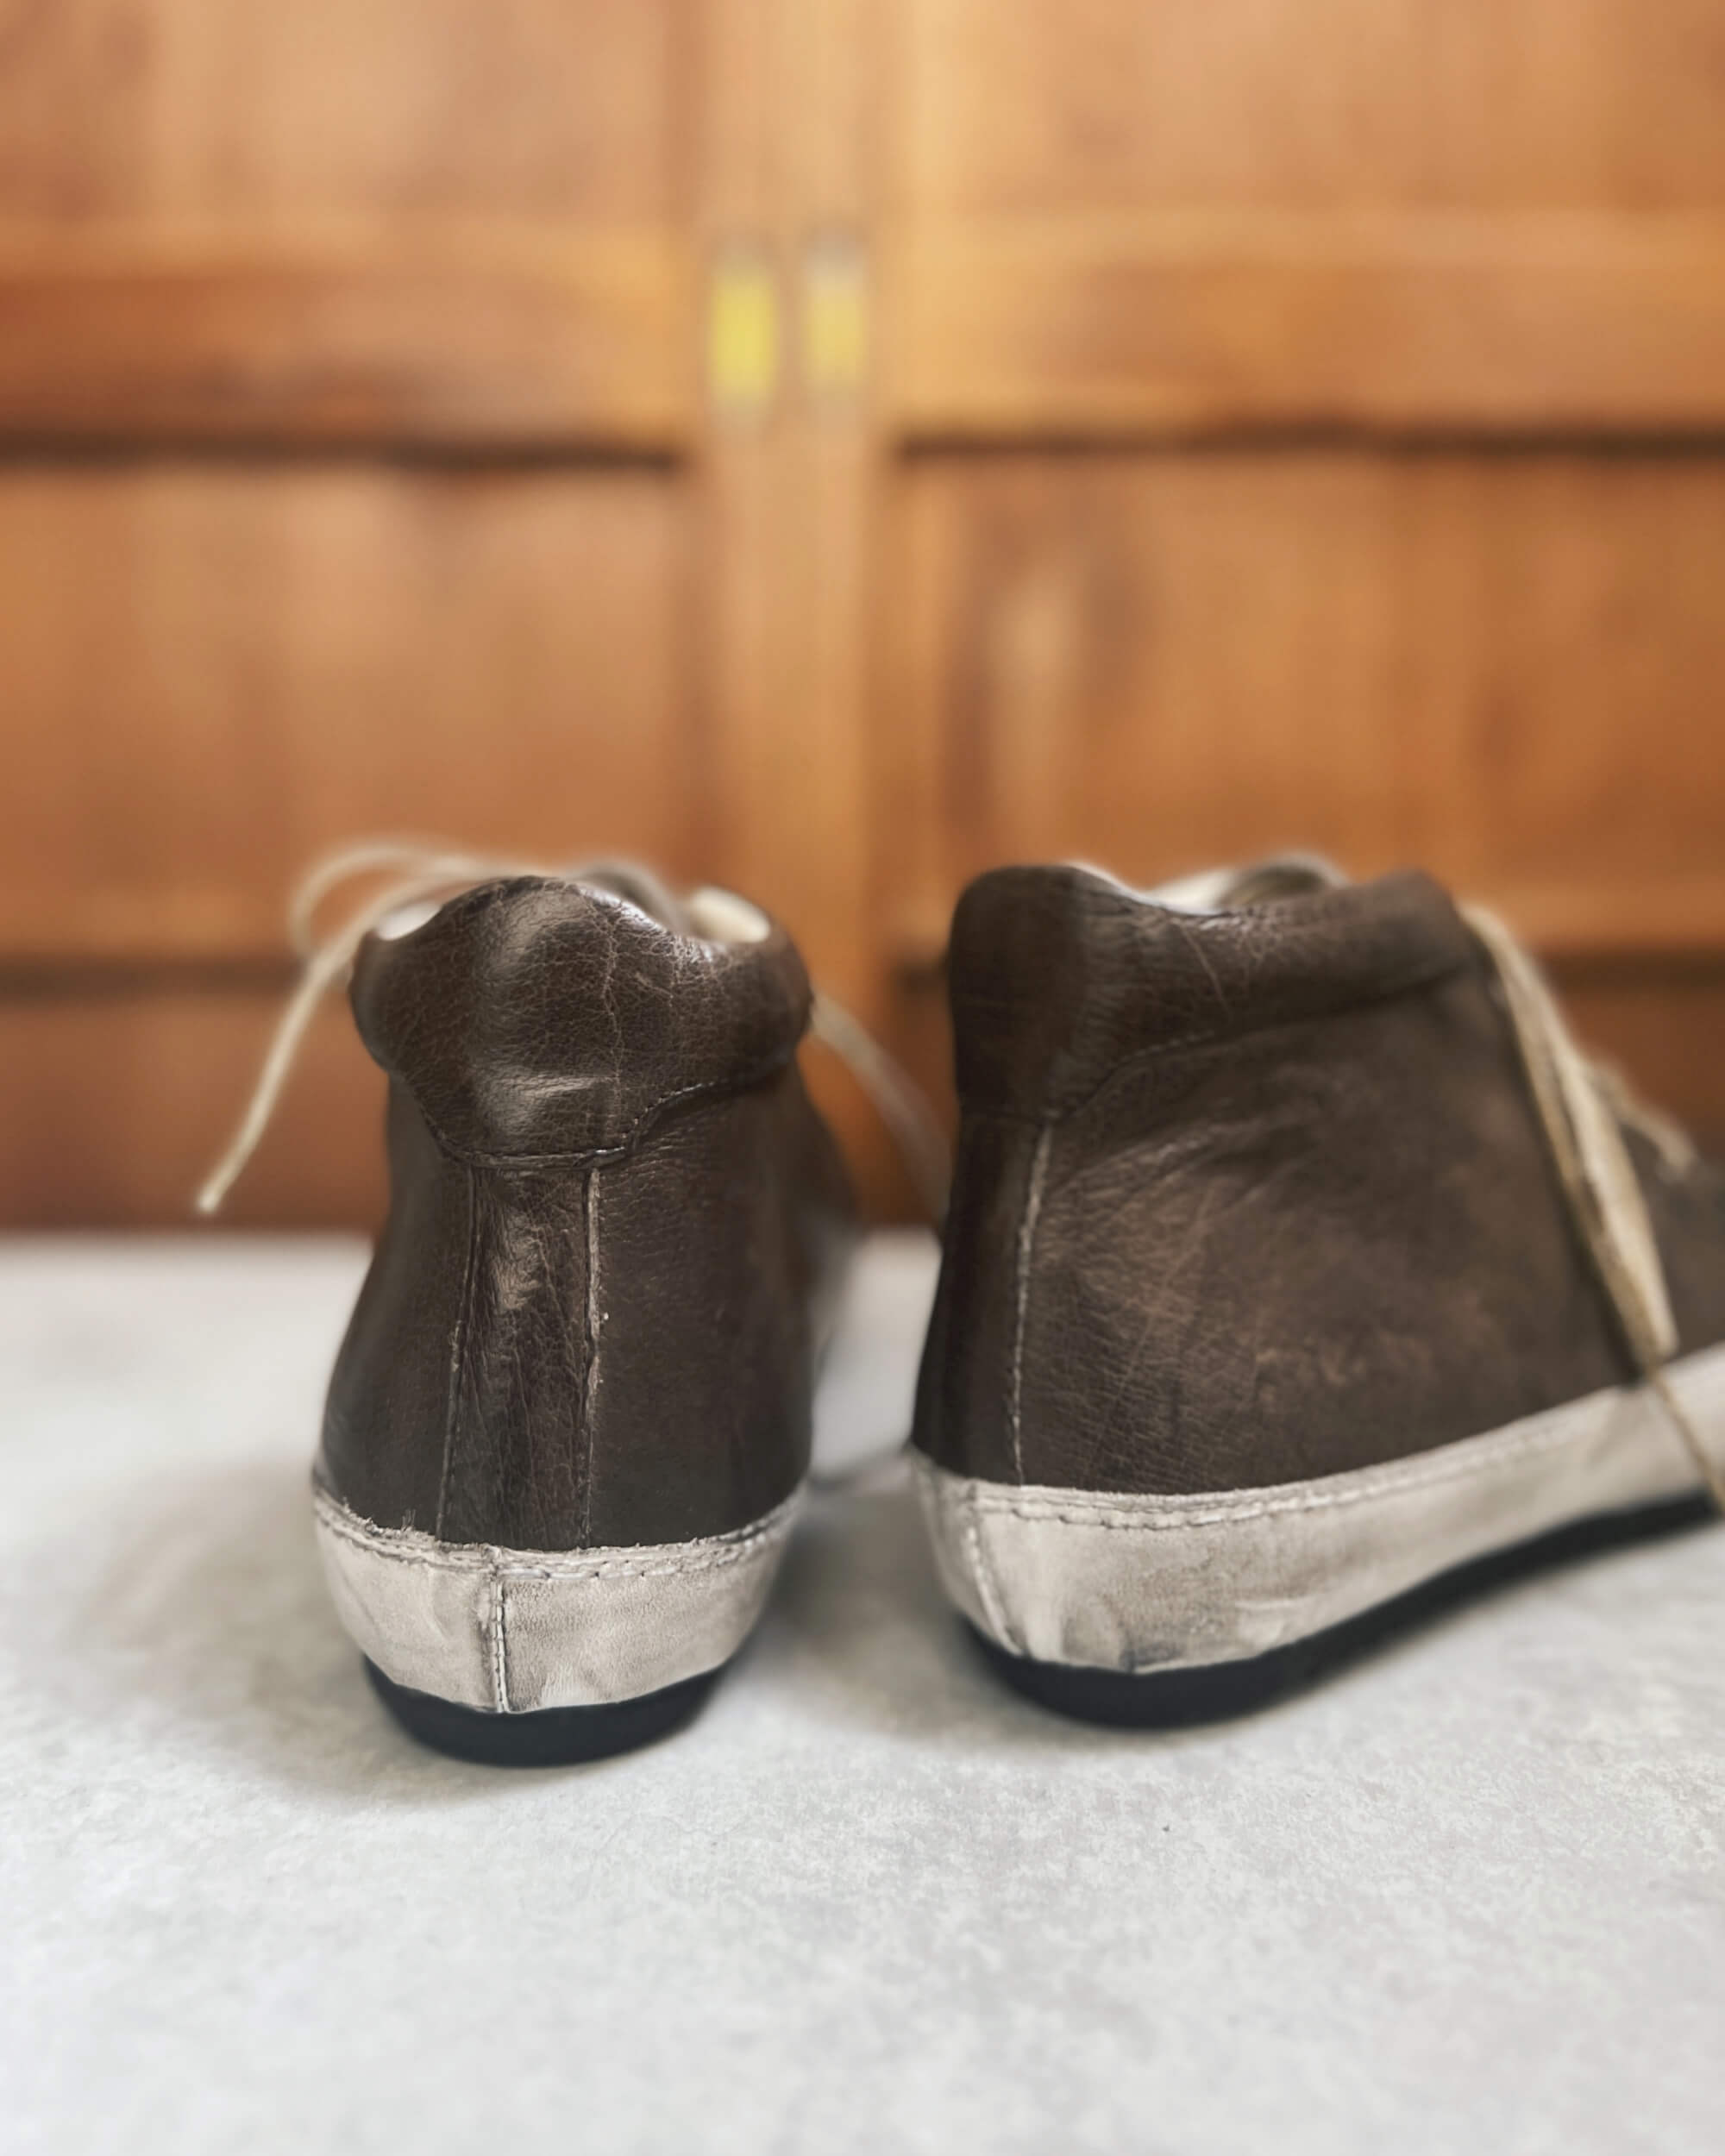 handmade italian leather shoes from victoria varrasso